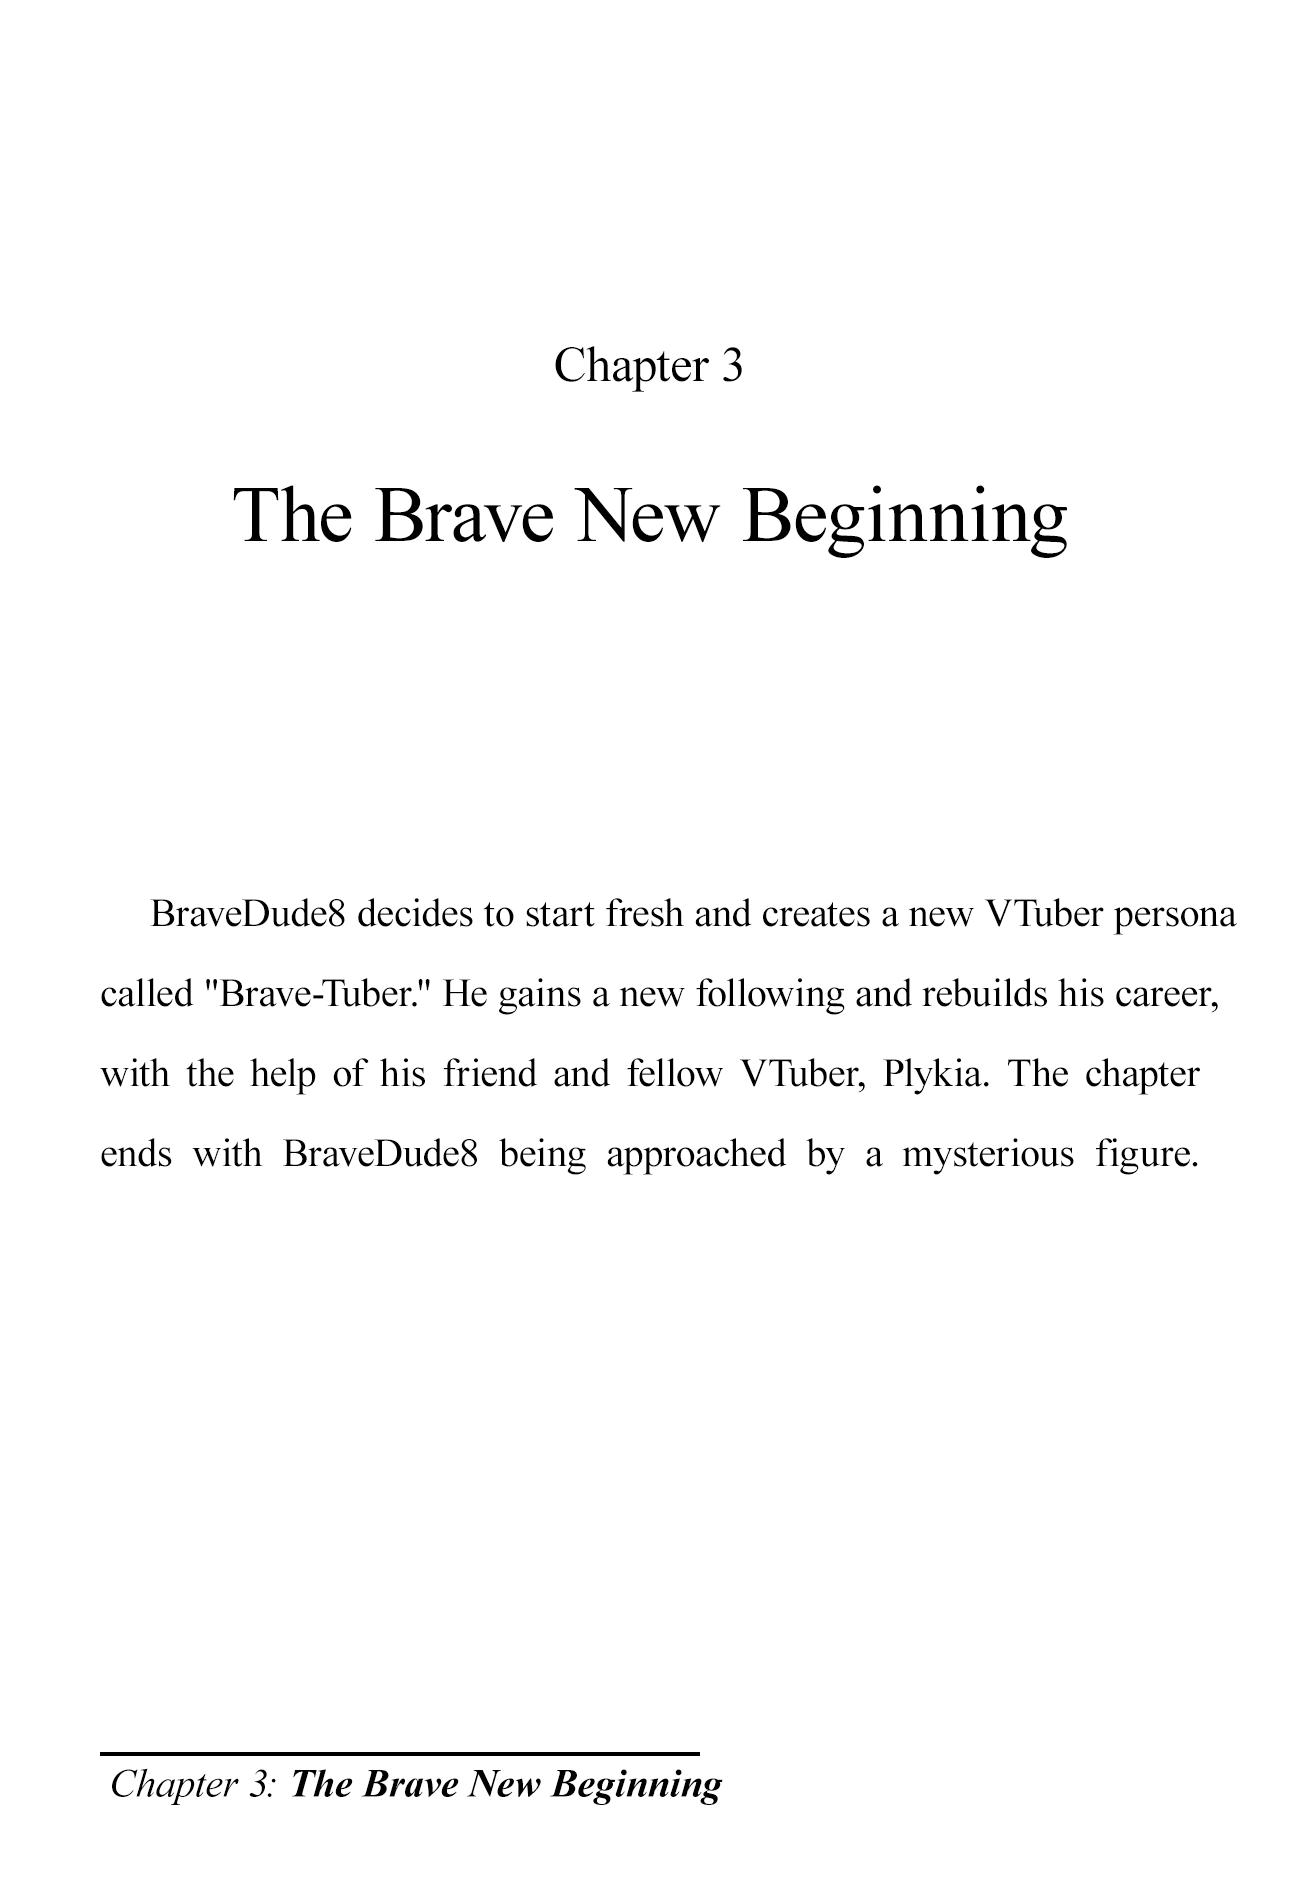 The Brave-Tuber Vol.1 Chapter 3: The Brave New Beginning - Picture 1